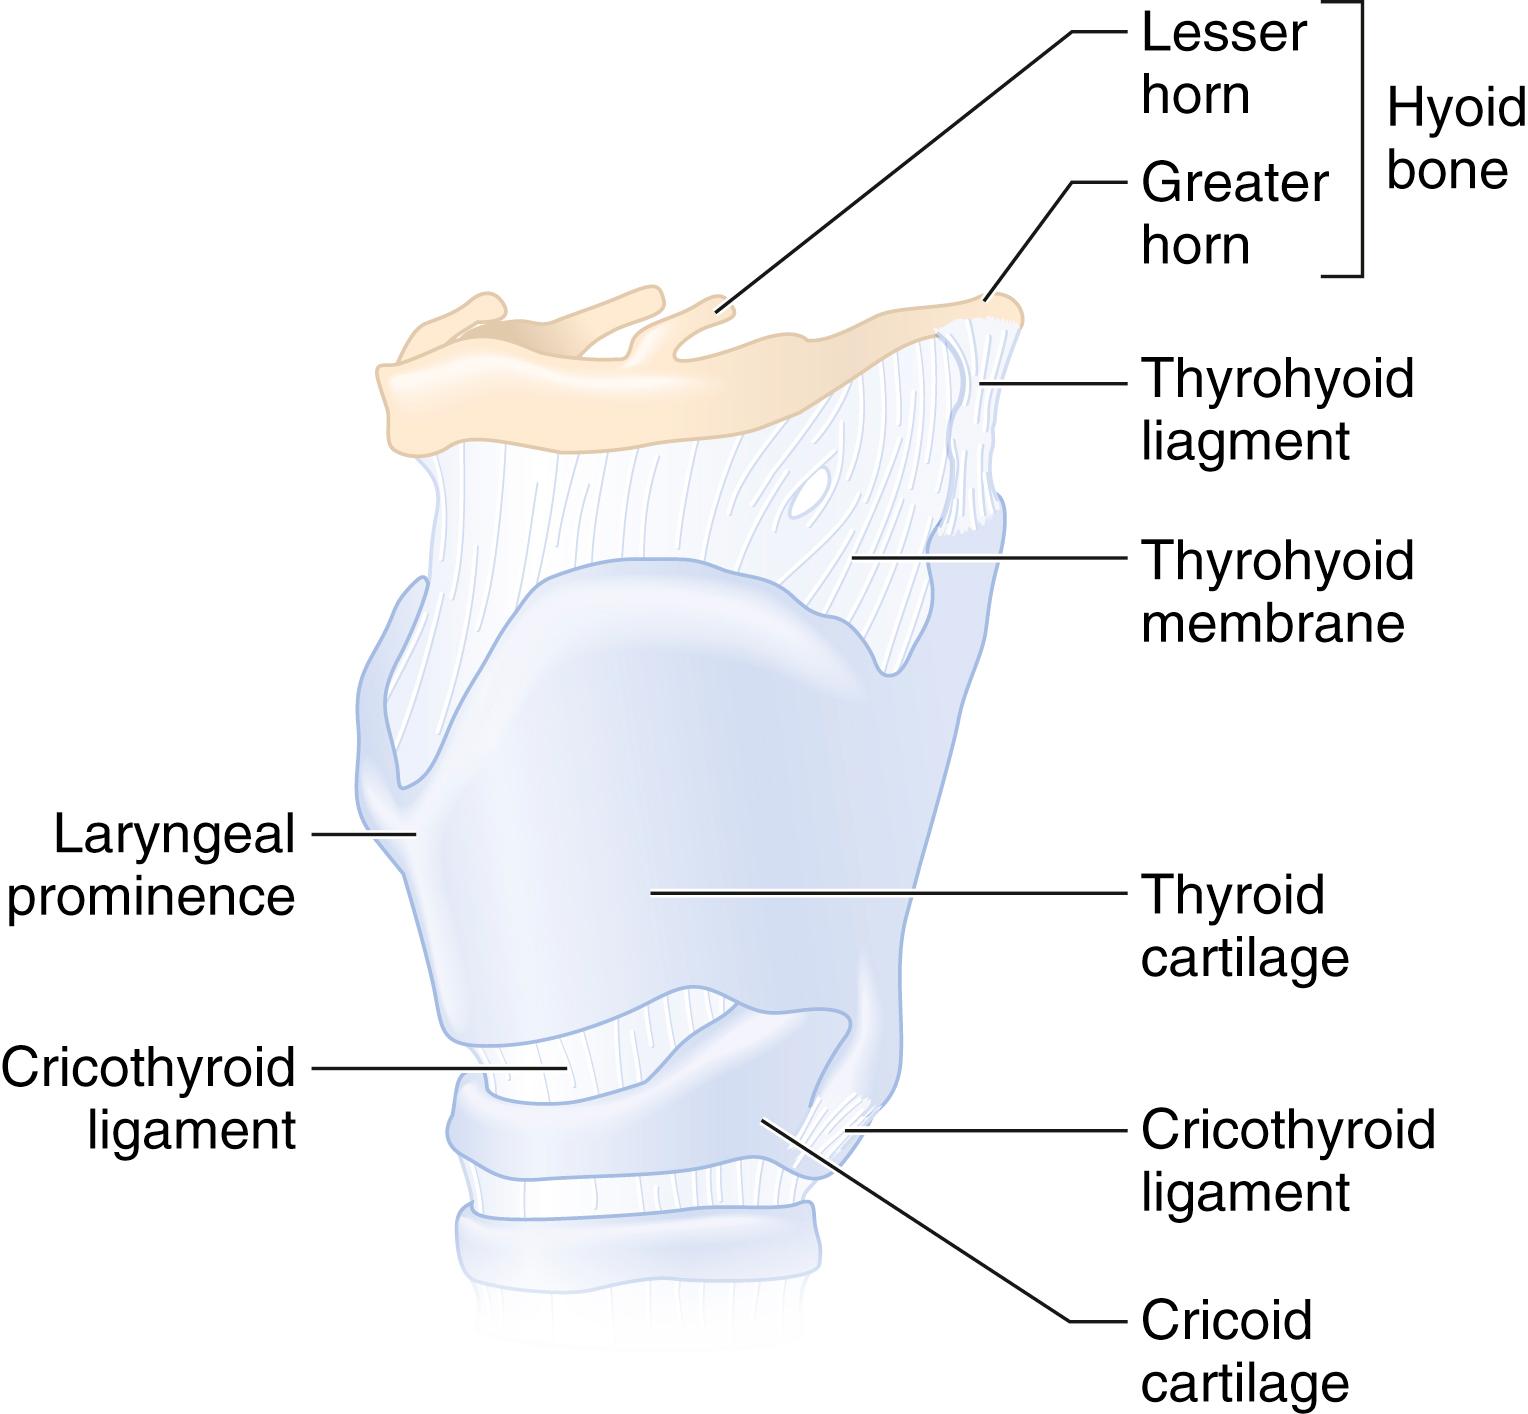 Fig. 44.7, Cartilaginous and membranous components of the larynx.